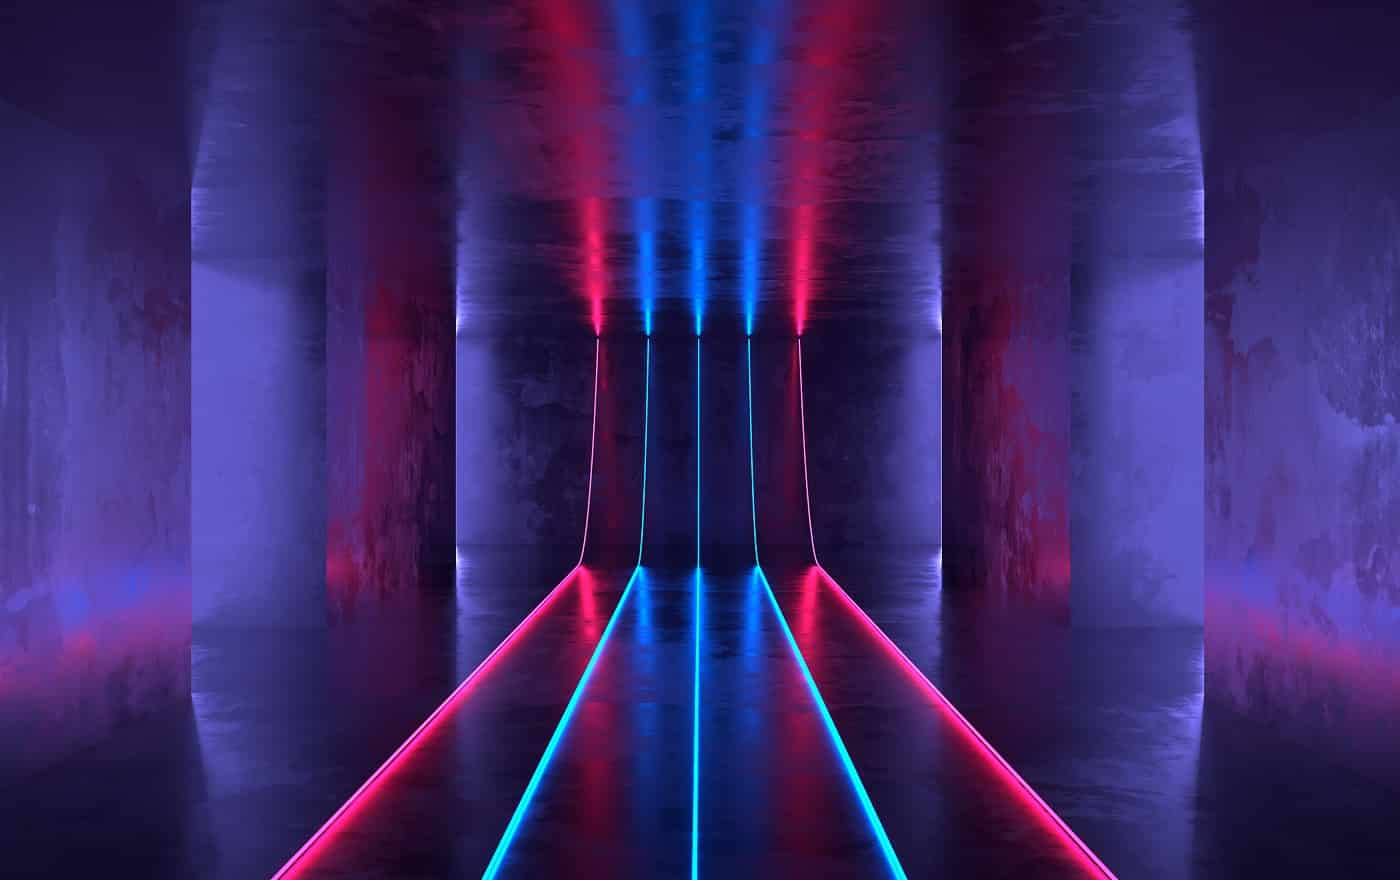 Futuristic sci-fi concrete room with glowing neon. Virtual reality portal, computer video games, vibrant colors, laser energy source. Blue and red neon lights